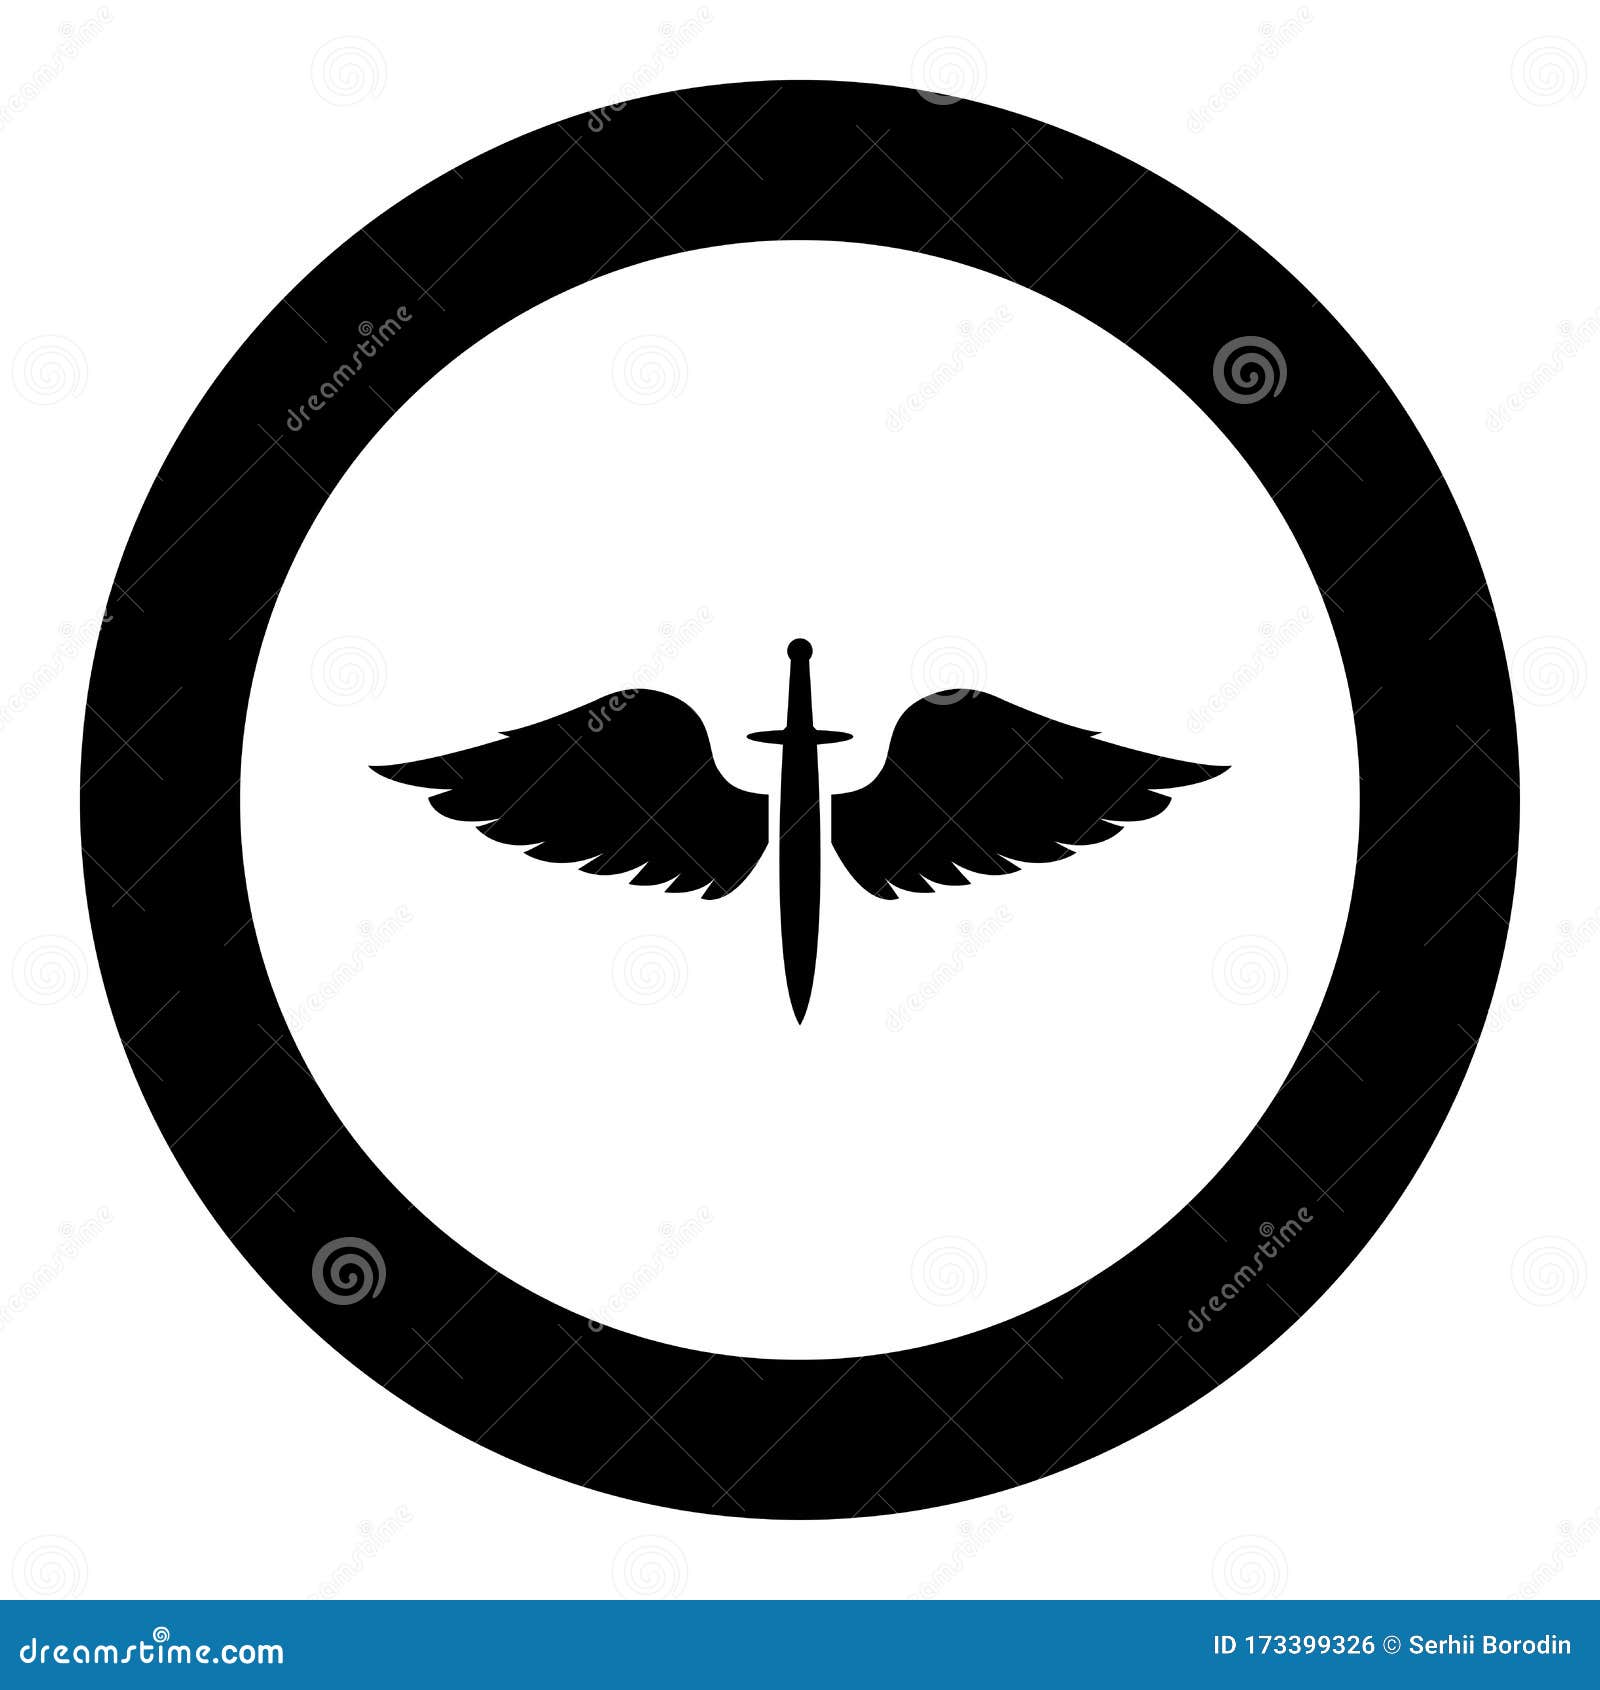 wings and sword  cadets winged blade weapon medieval age warrior insignia blazon bravery concept icon in circle round black